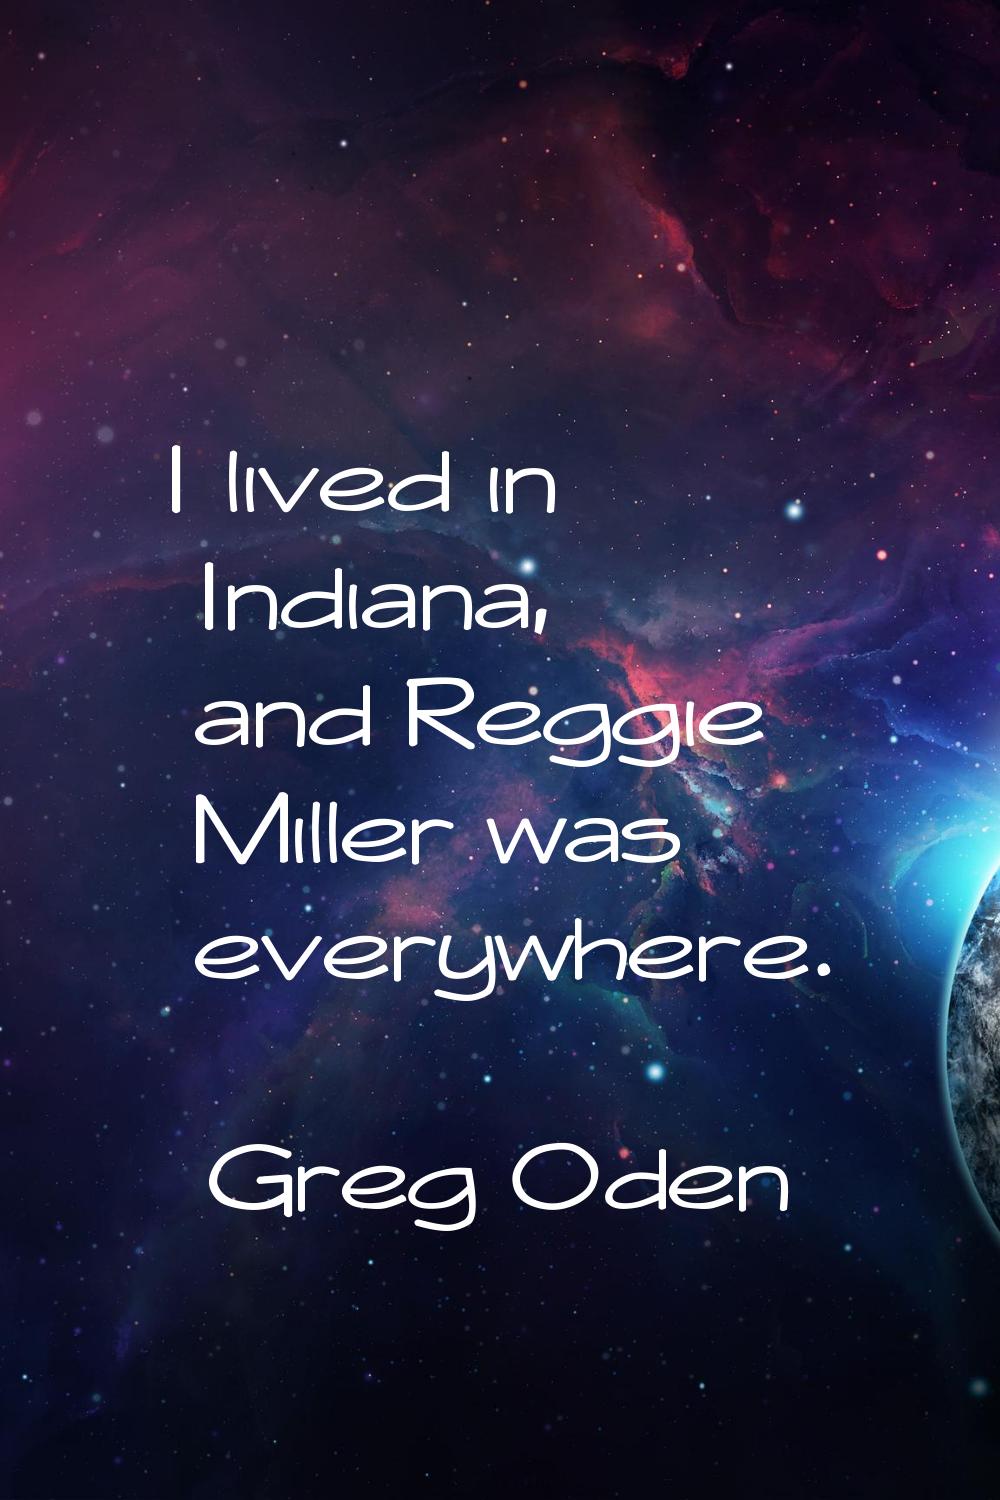 I lived in Indiana, and Reggie Miller was everywhere.